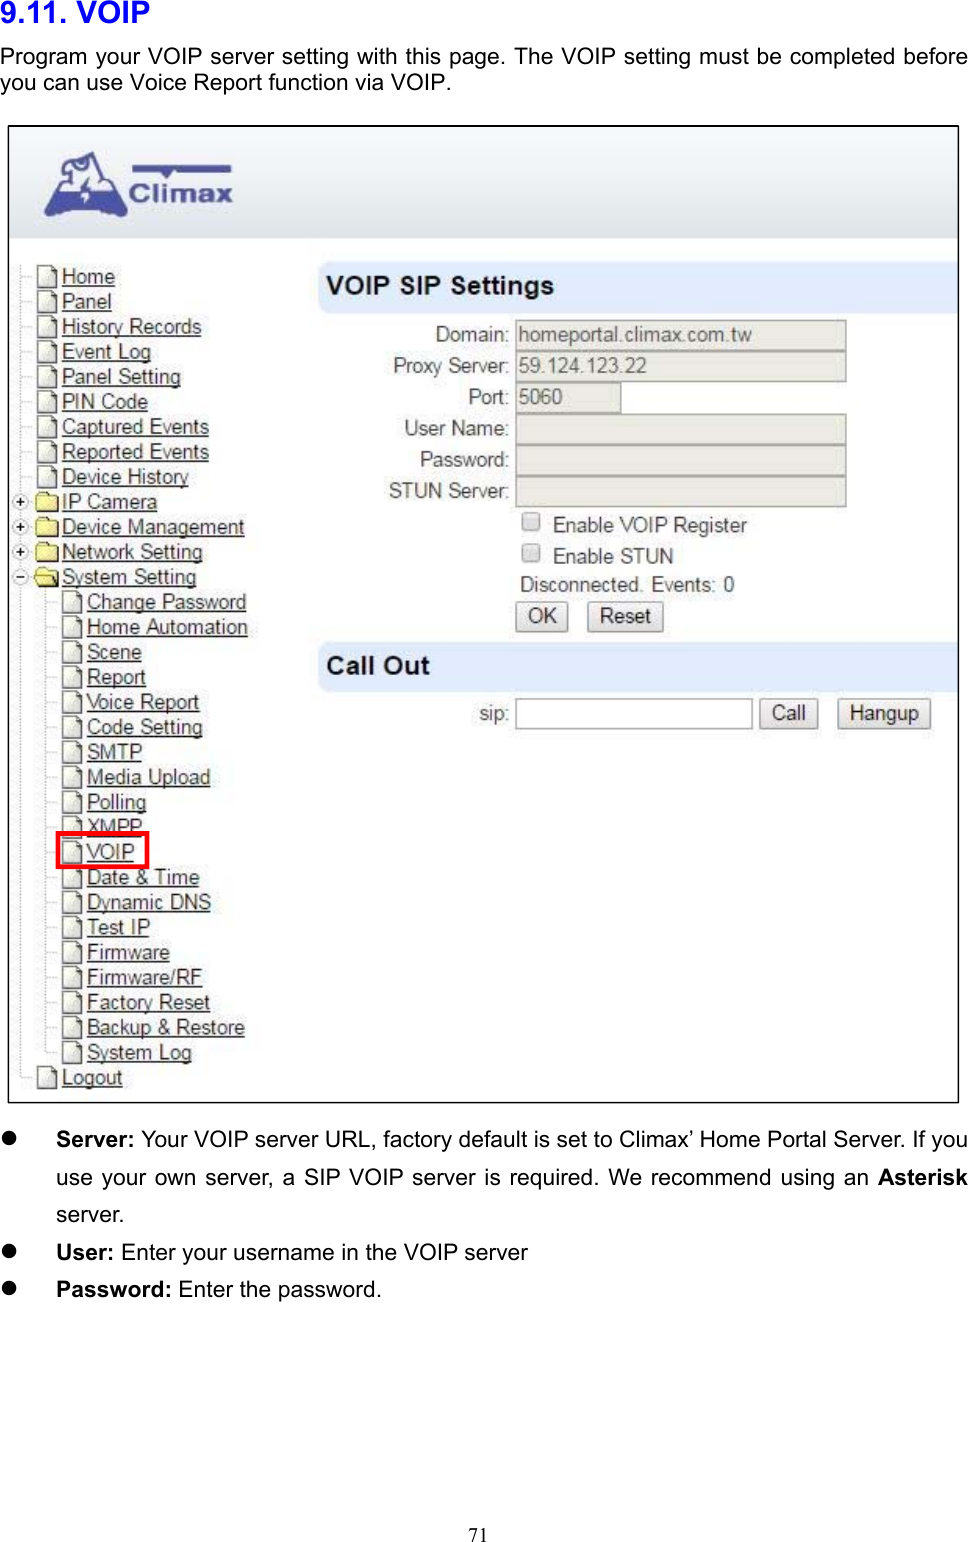  719.11. VOIP   Program your VOIP server setting with this page. The VOIP setting must be completed before you can use Voice Report function via VOIP.   Server: Your VOIP server URL, factory default is set to Climax’ Home Portal Server. If you use your  own server, a SIP VOIP server is required. We recommend  using an Asterisk server.  User: Enter your username in the VOIP server  Password: Enter the password.    